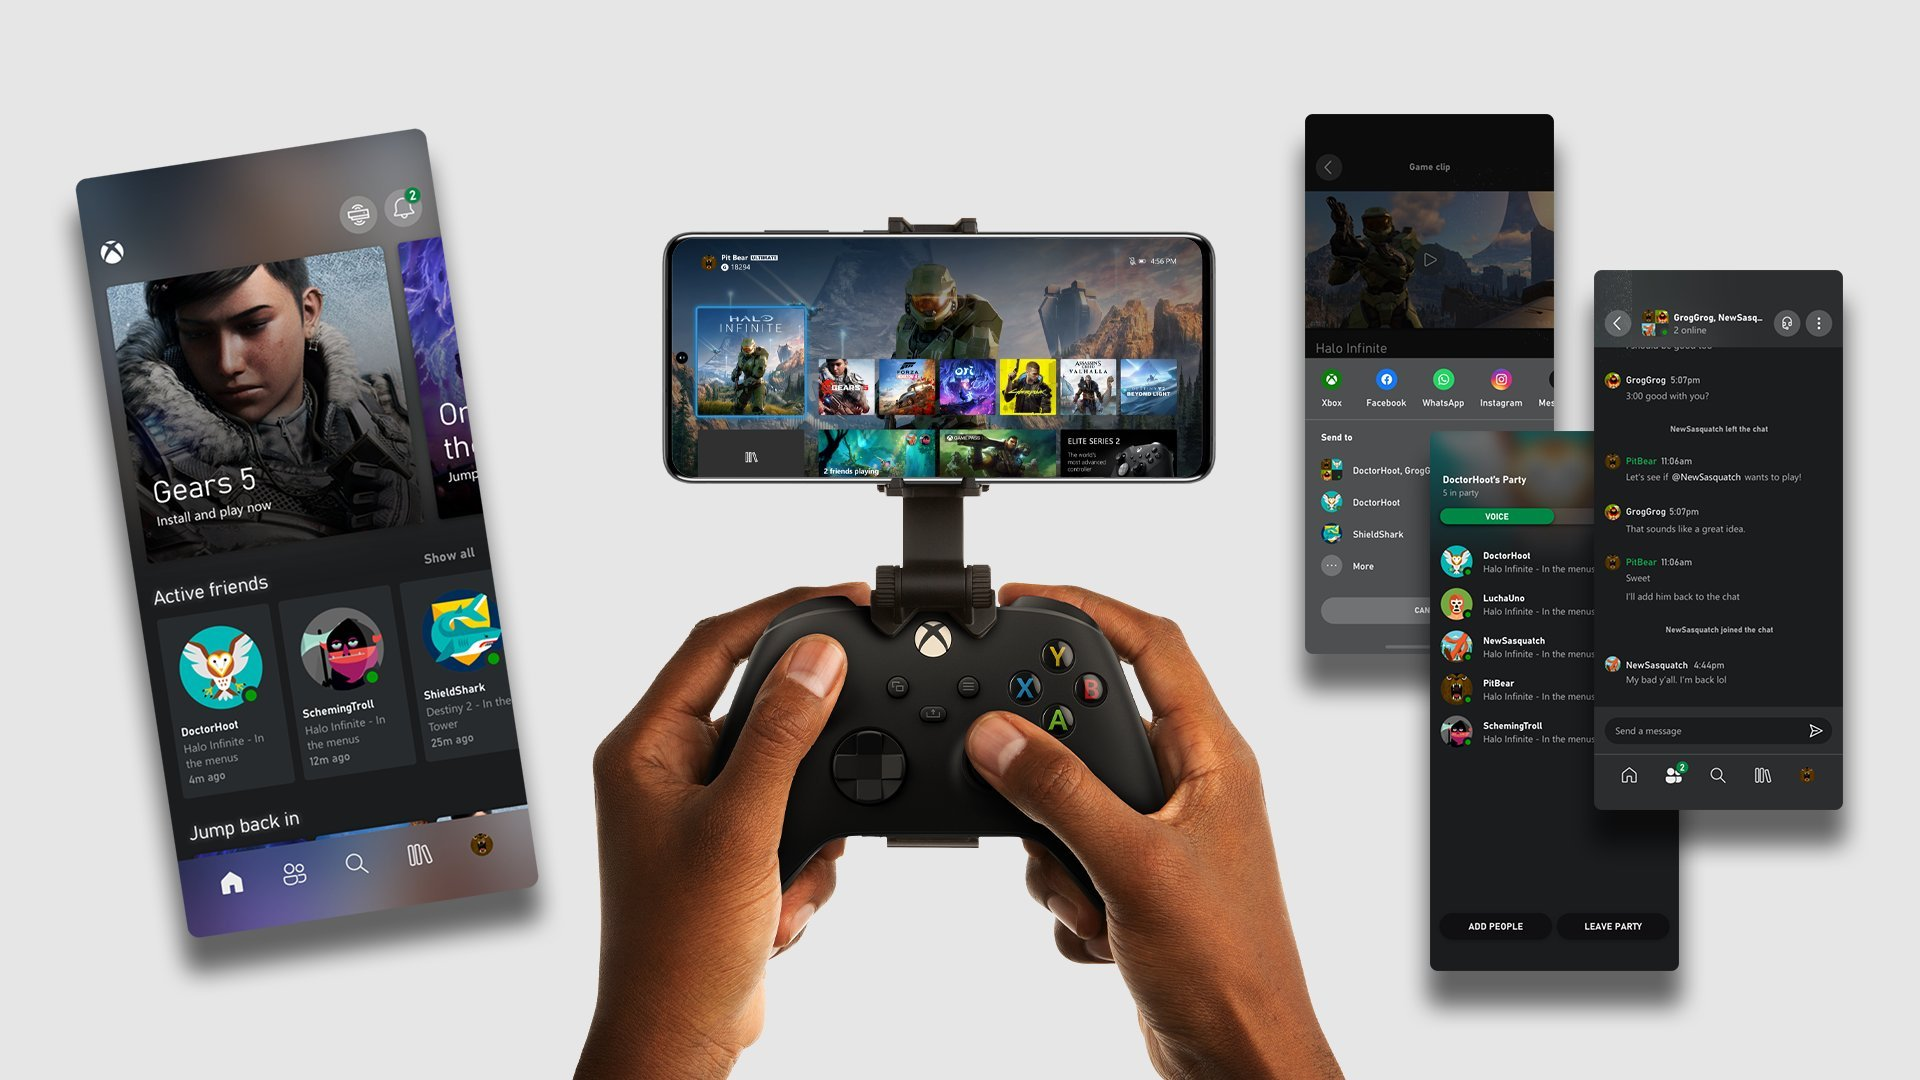 iphone games compatible with xbox one controller